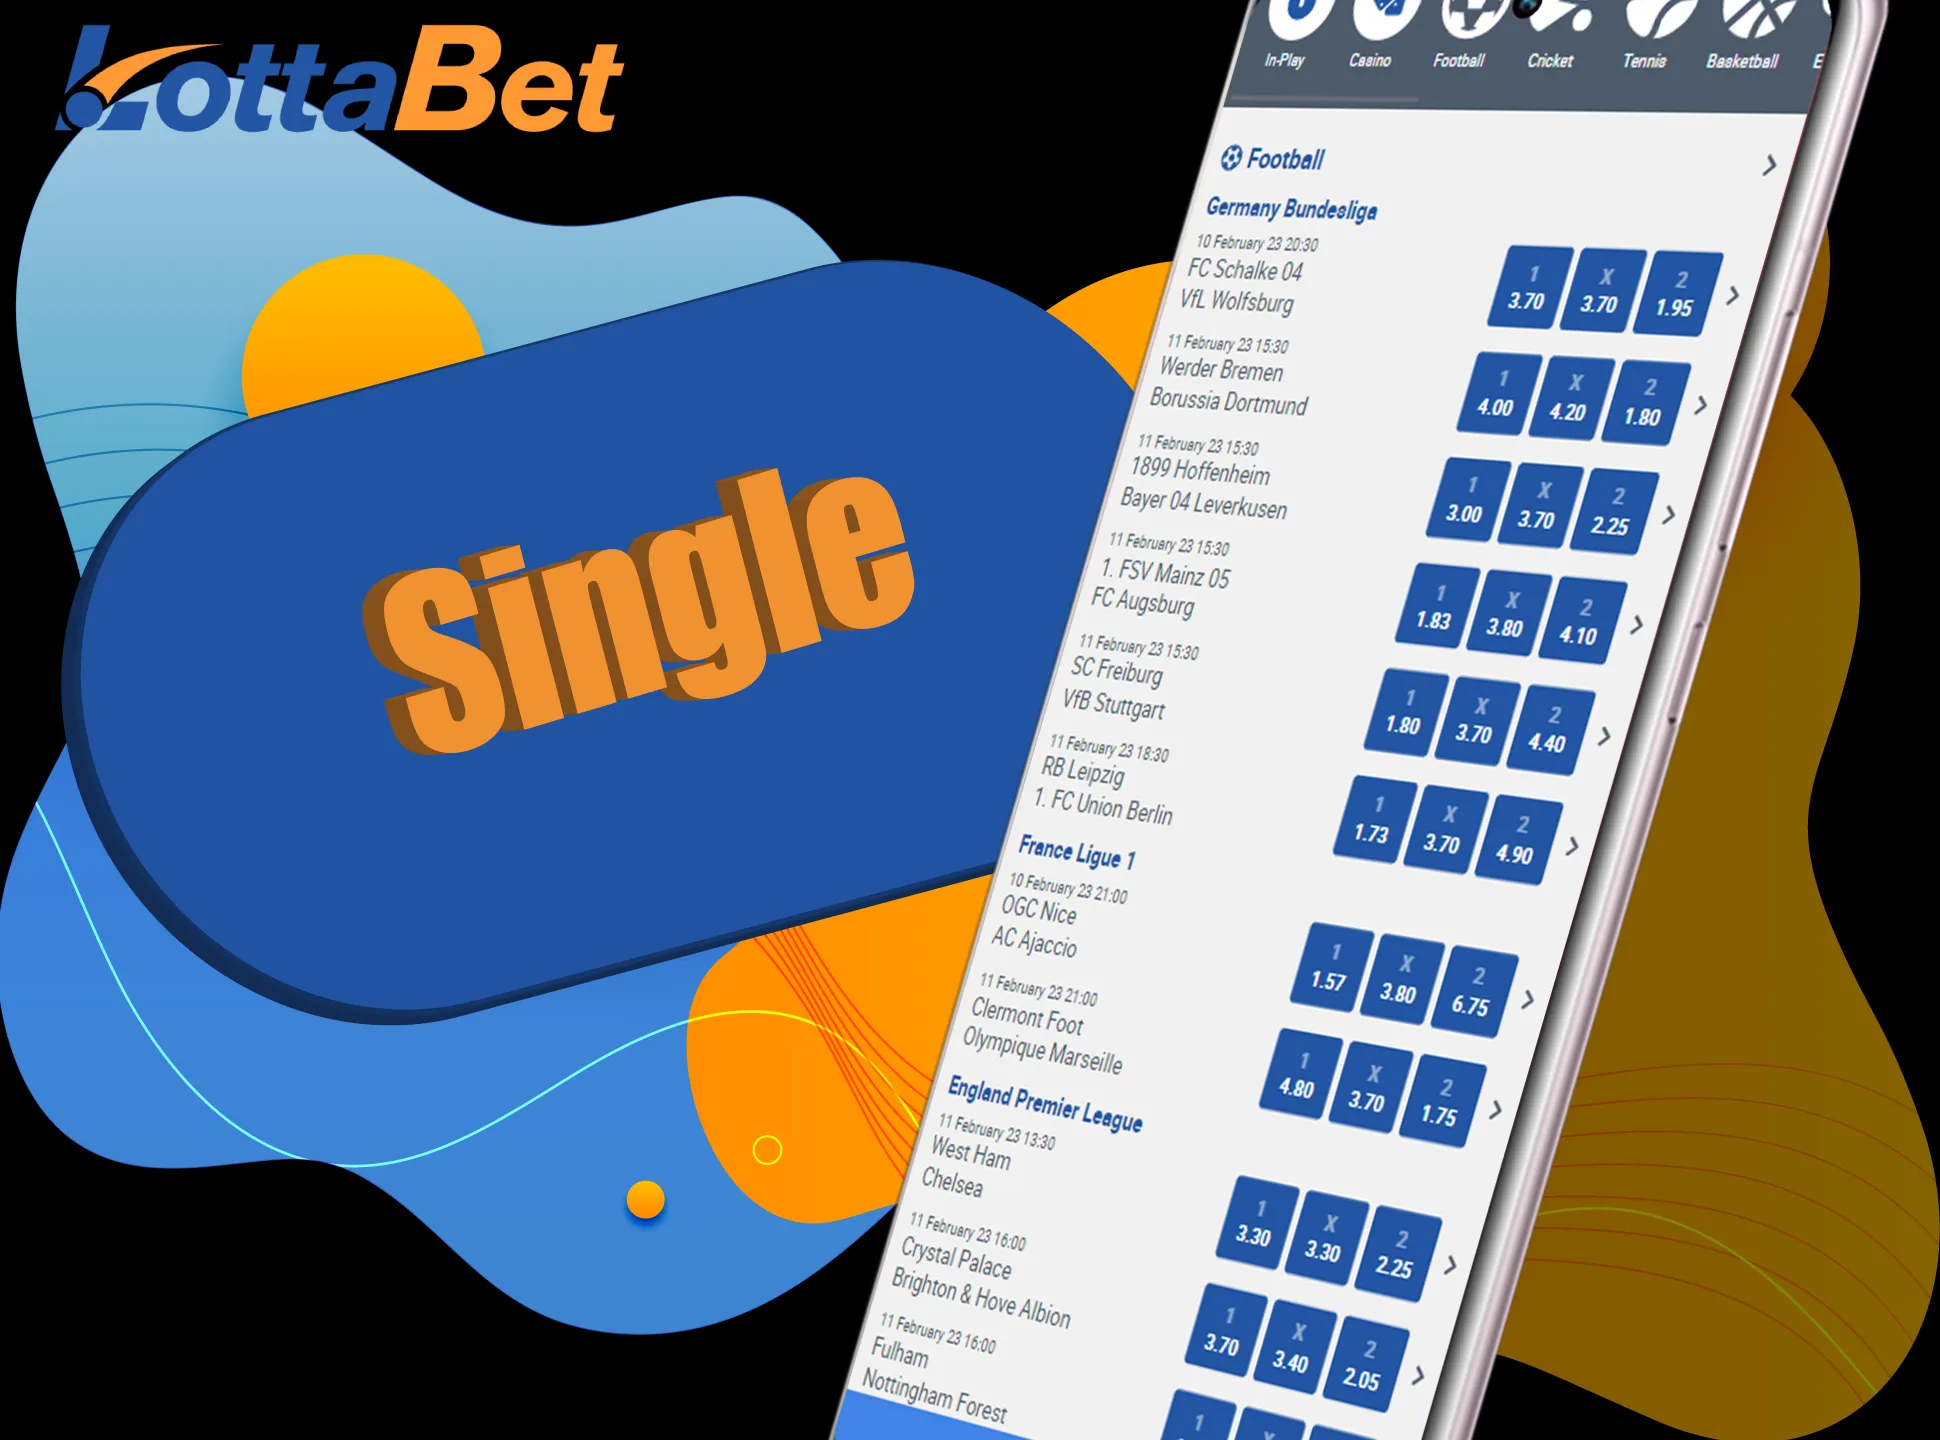 Single bets are easier for new bettors.